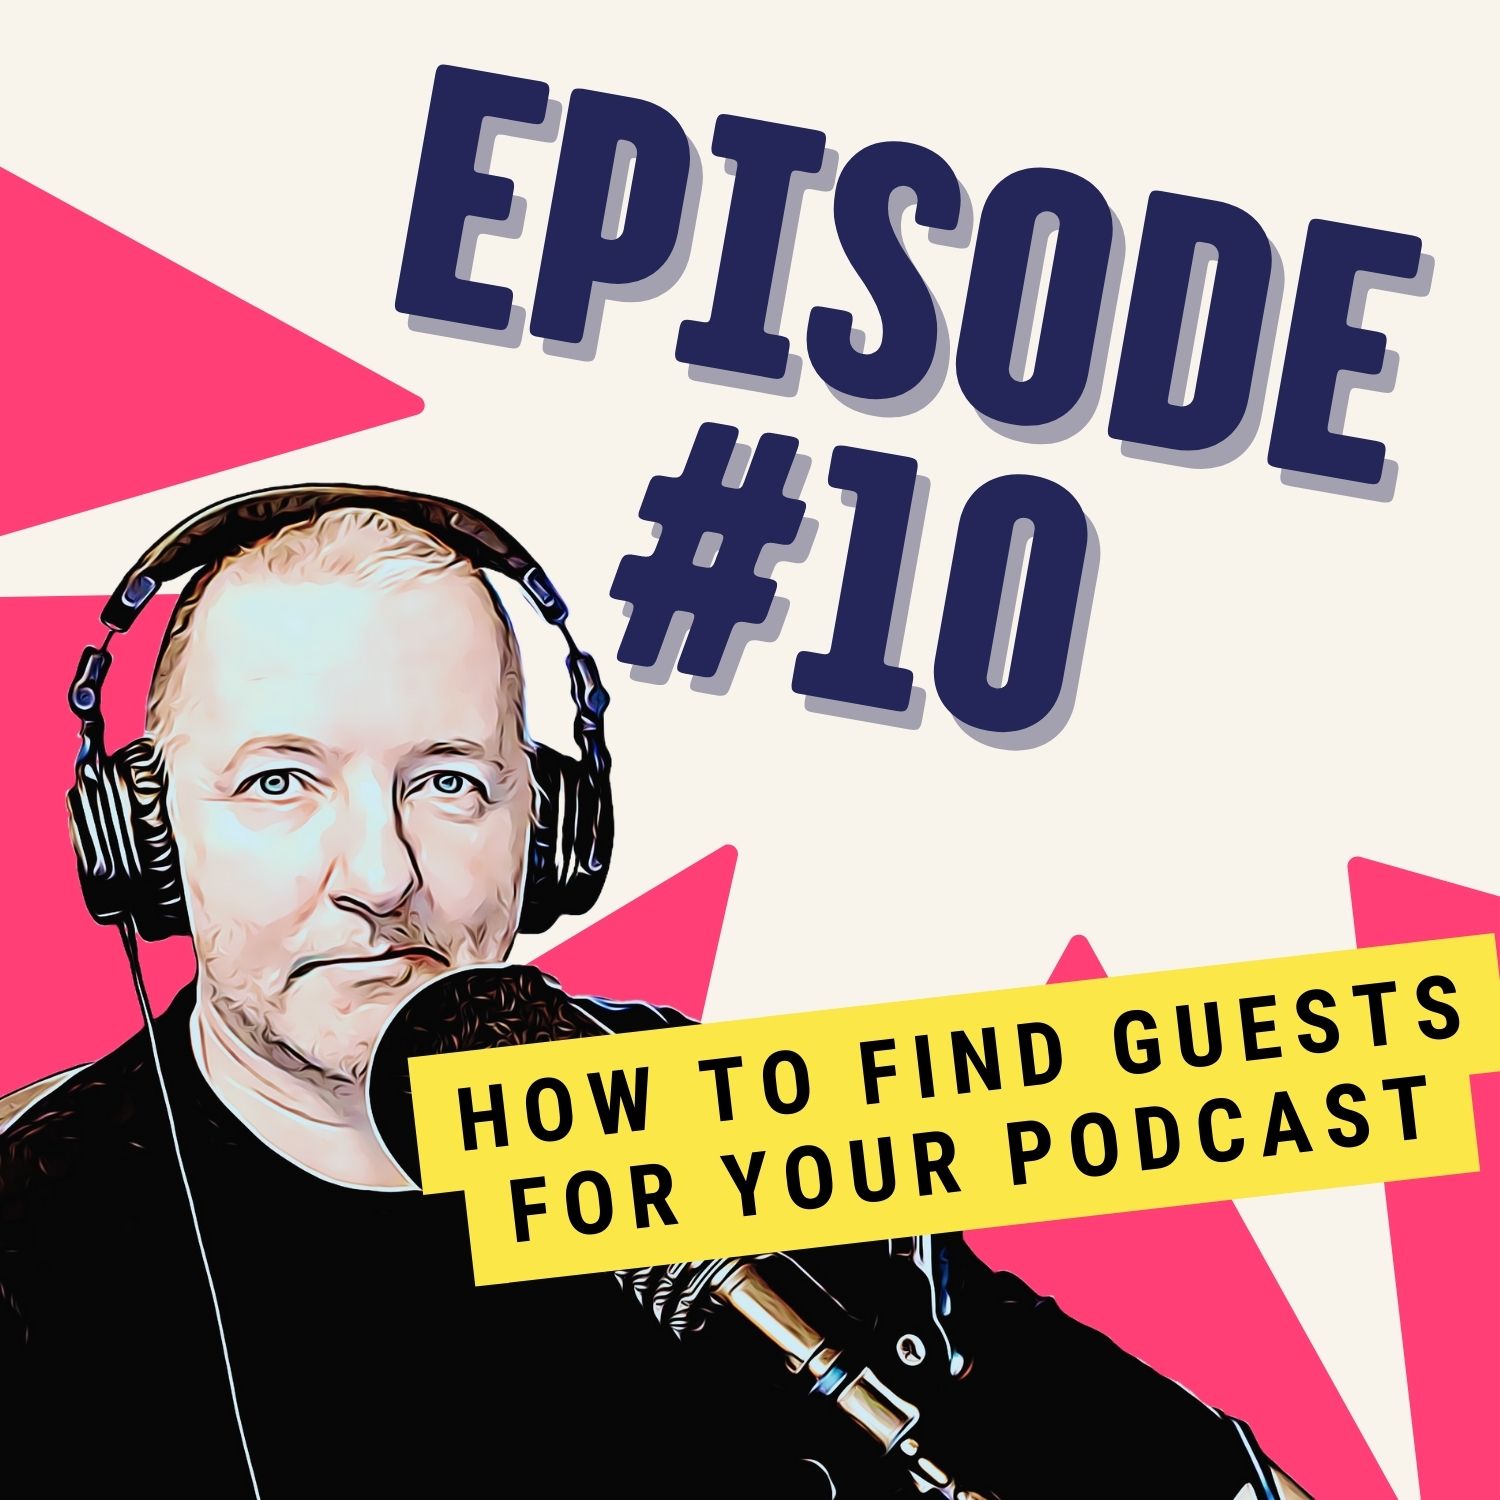 How to Find Guests for Your Podcast